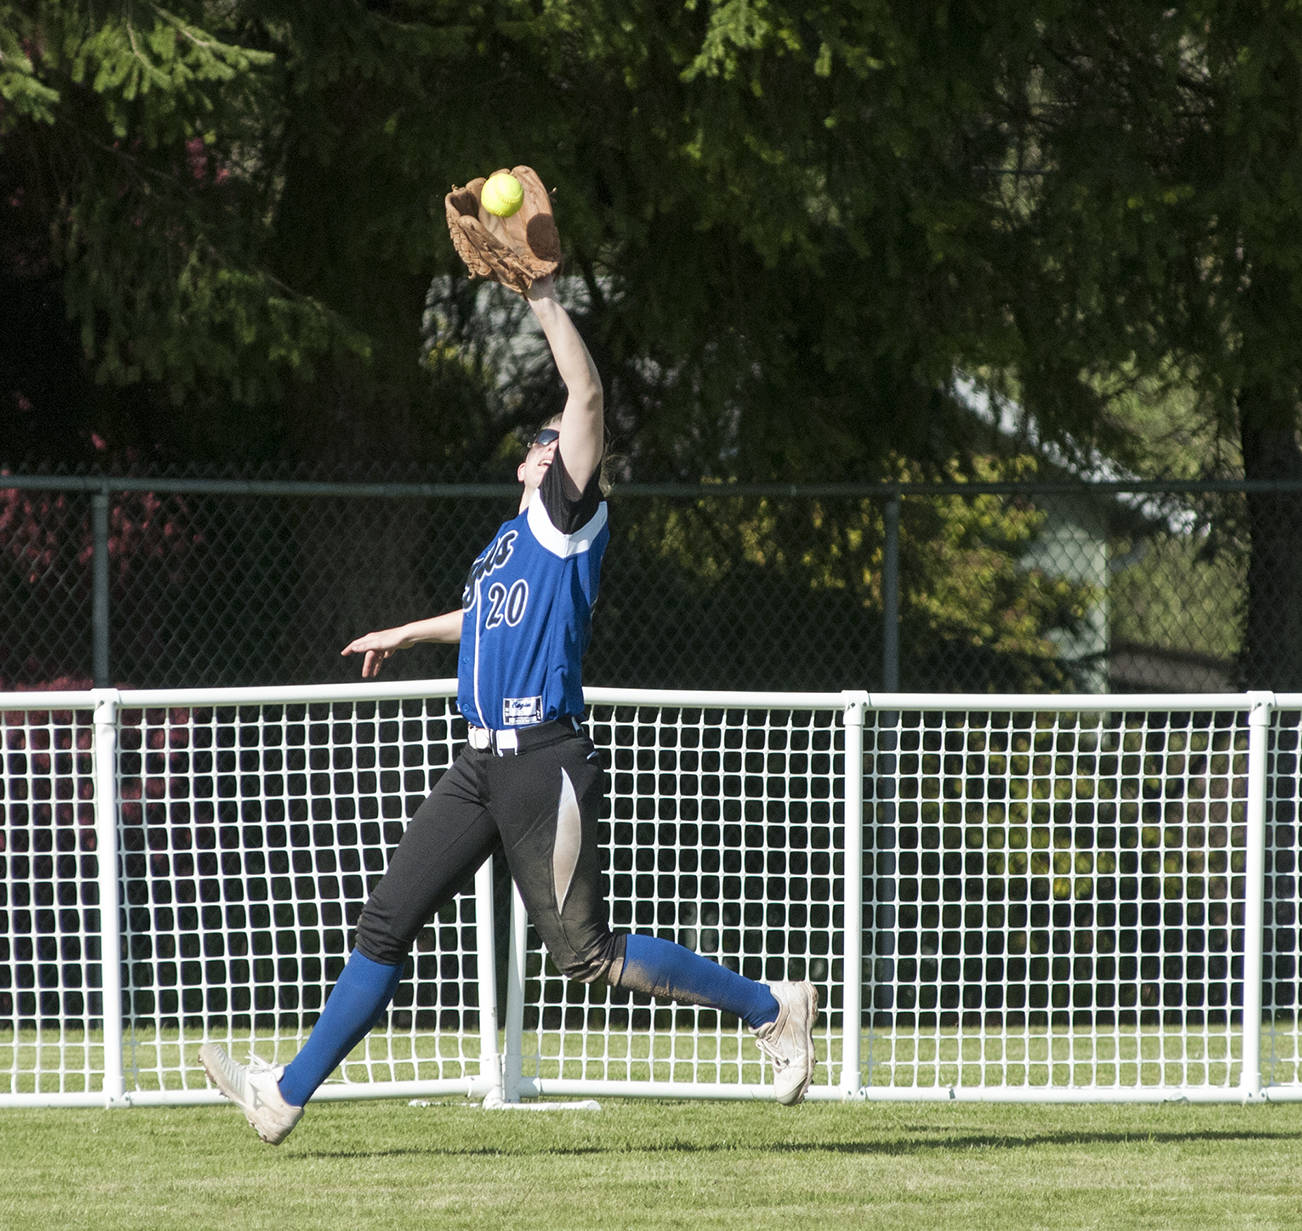 (Brendan Carl | Grays Harbor Newspaper Group) Elma’s Molly Johnston covers ground to make a catch in the outfield against Montesano on Wednesday.